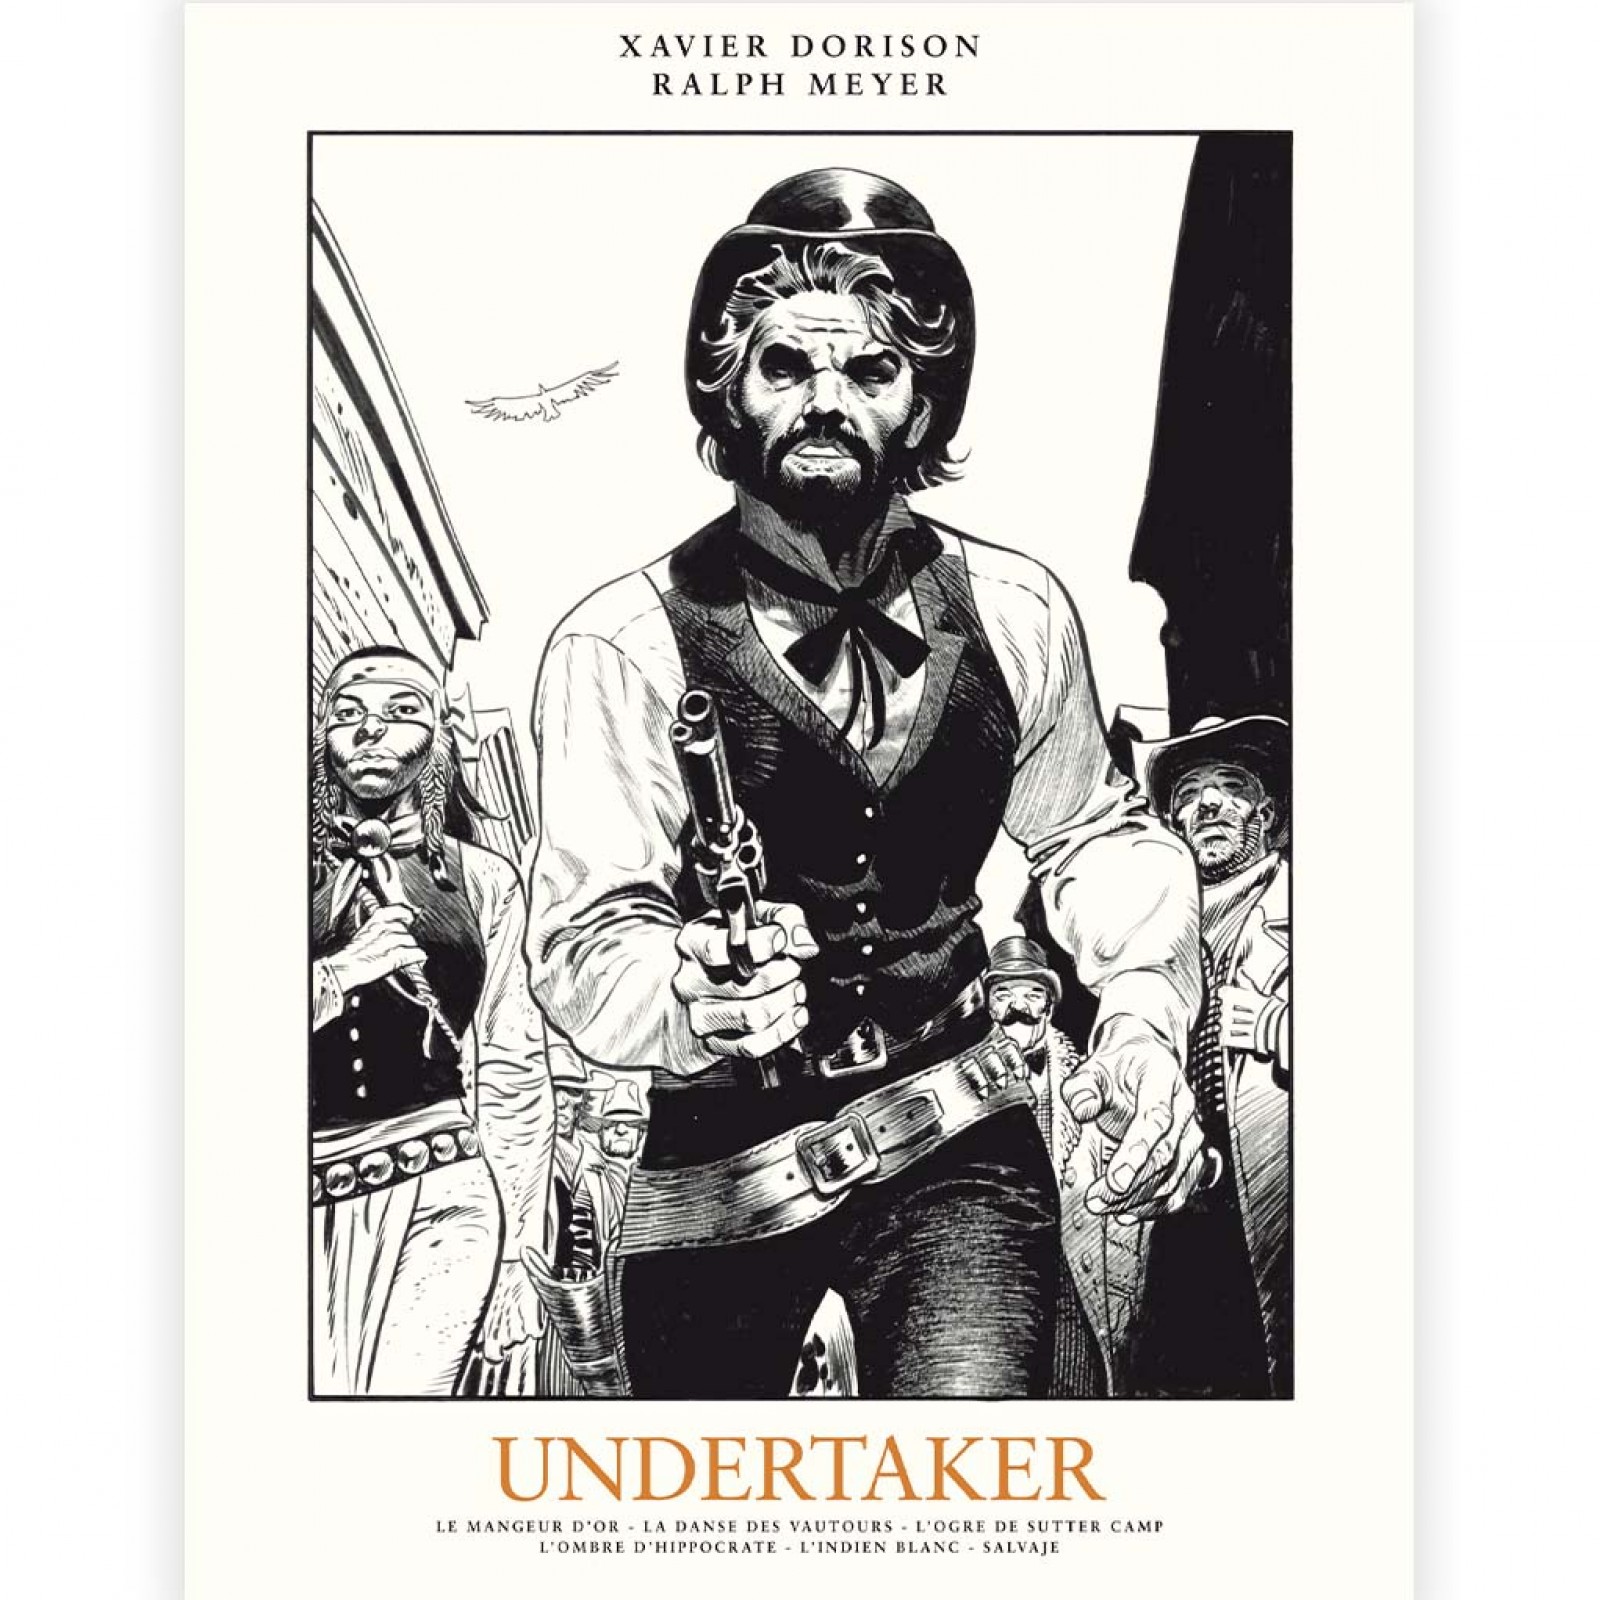 Undertaker - Tome 1 - Undertaker - Tome 1 - Le Mangeur d'or